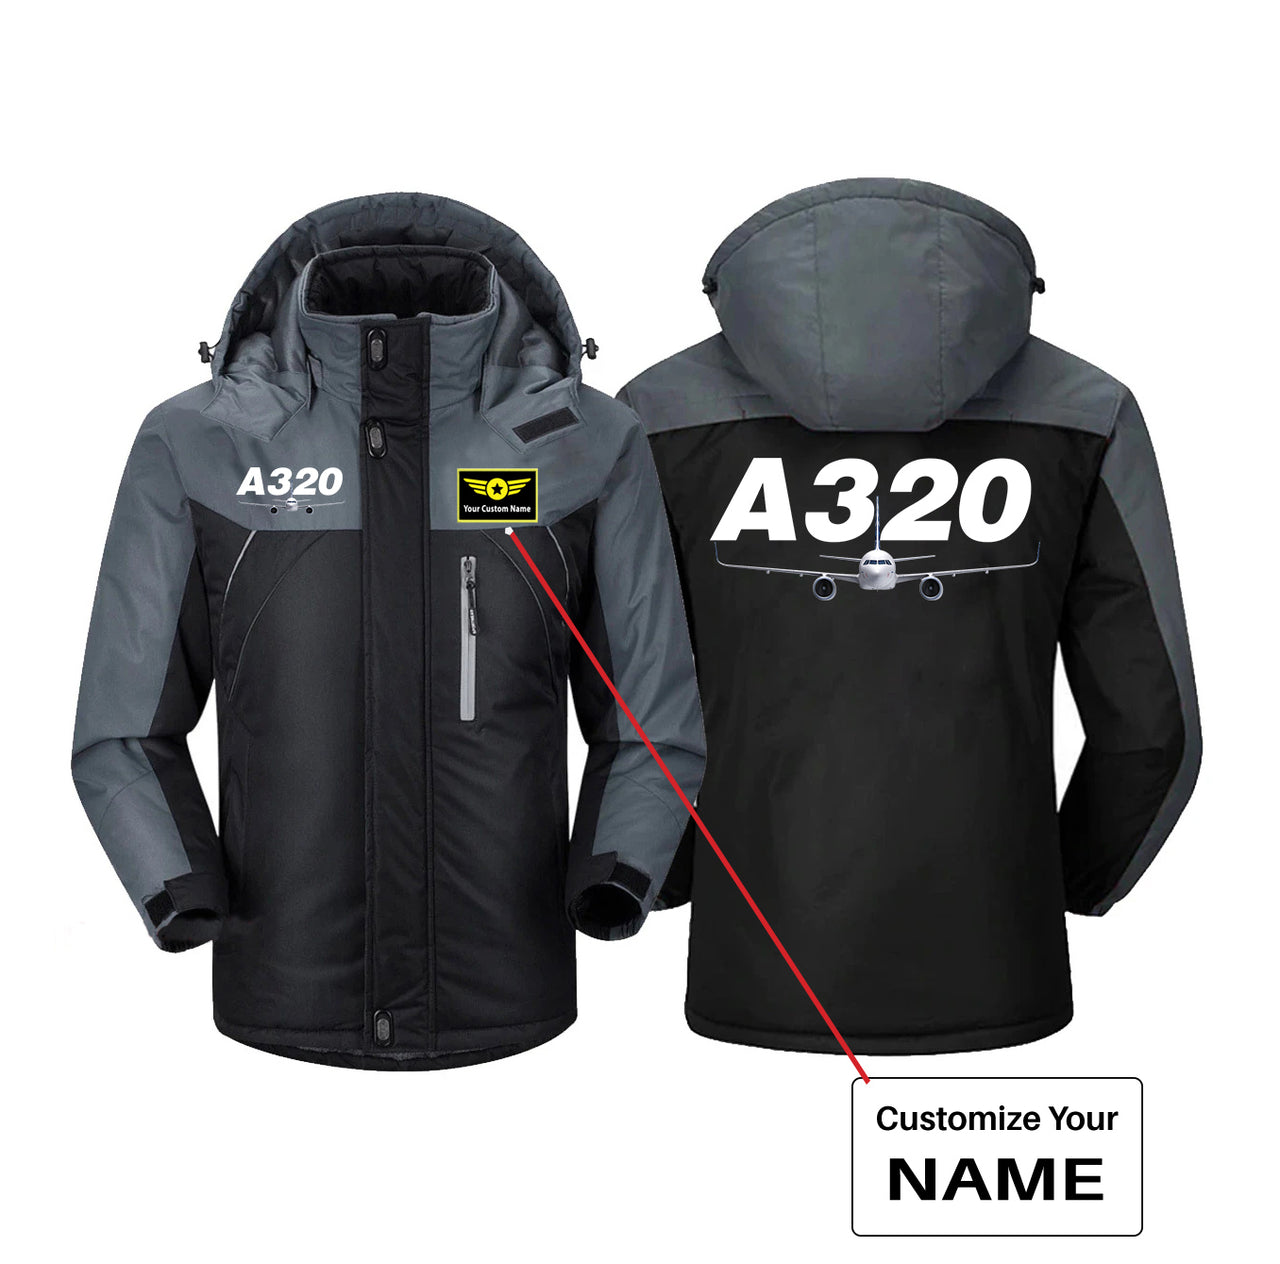 Super Airbus A320 Designed Thick Winter Jackets